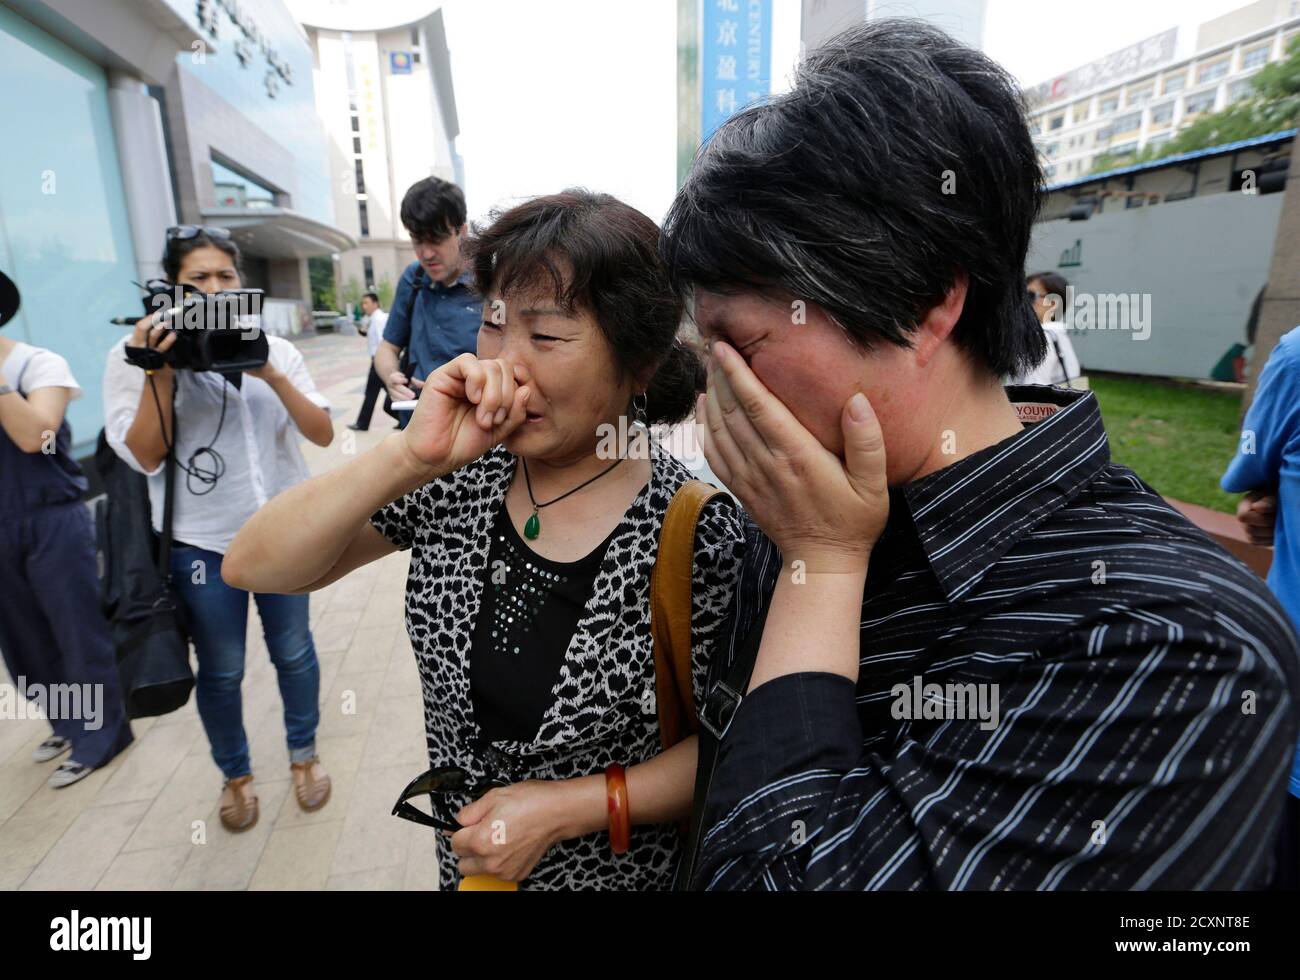 A woman (L), whose son, daughter-in-law and grandson were aboard the missing Malaysia Airlines flight MH370, cries after she and other family members failed to express their appeals to the airline outside its office in Beijing June 11, 2014. Months of searches have failed to turn up any trace of the missing Boeing 777, which disappeared on March 8 carrying 239 passengers and crew shortly after taking off from Kuala Lumpur bound for Beijing. REUTERS/Jason Lee (CHINA - Tags: TRANSPORT DISASTER) Stock Photo